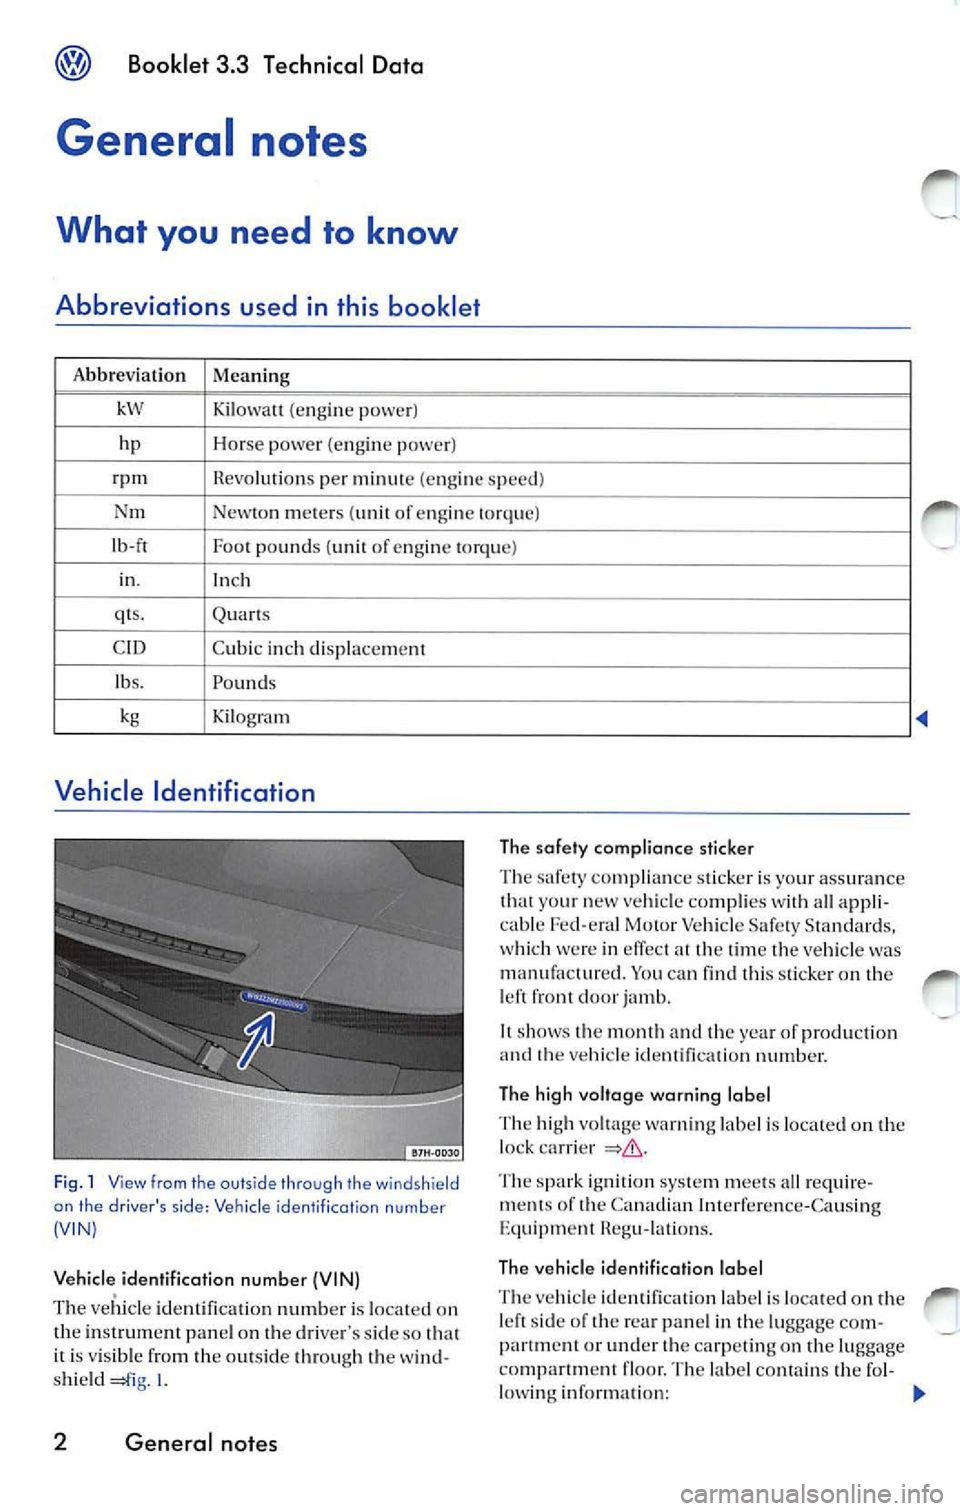 VOLKSWAGEN JETTA 2008  Owners Manual Booklet  3.3  Technical  Data 
General  notes 
What  you  need  to  know 
Abbreviations  used  in  this  booklet 
Abbreviation Meaning 
kW  Kilow att  (e n gin e  pow er) 
hp  Hor se  power  ( engin e